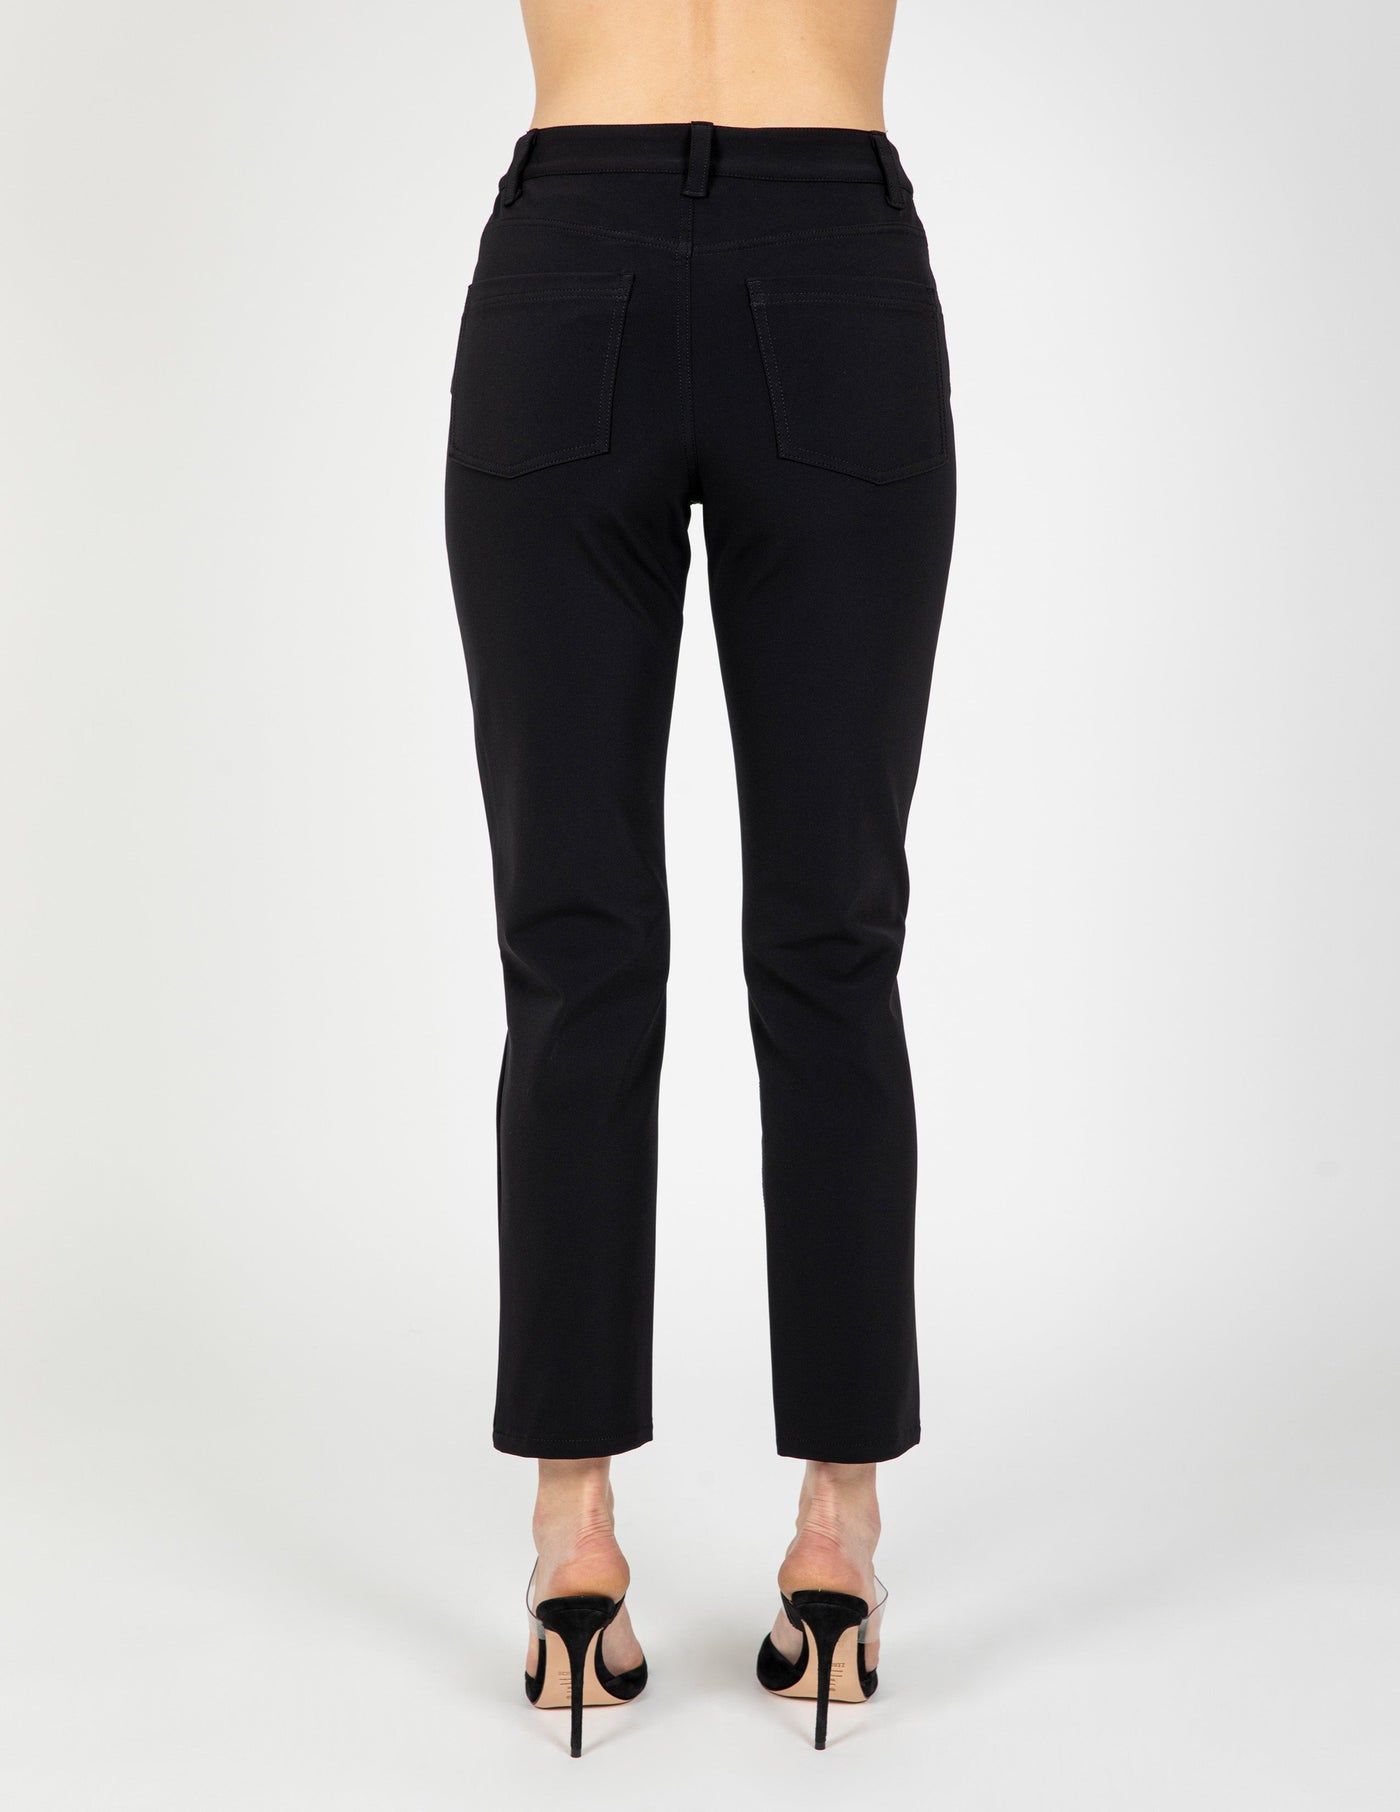 Miracle Stretch 4 Pocket Jean in Black